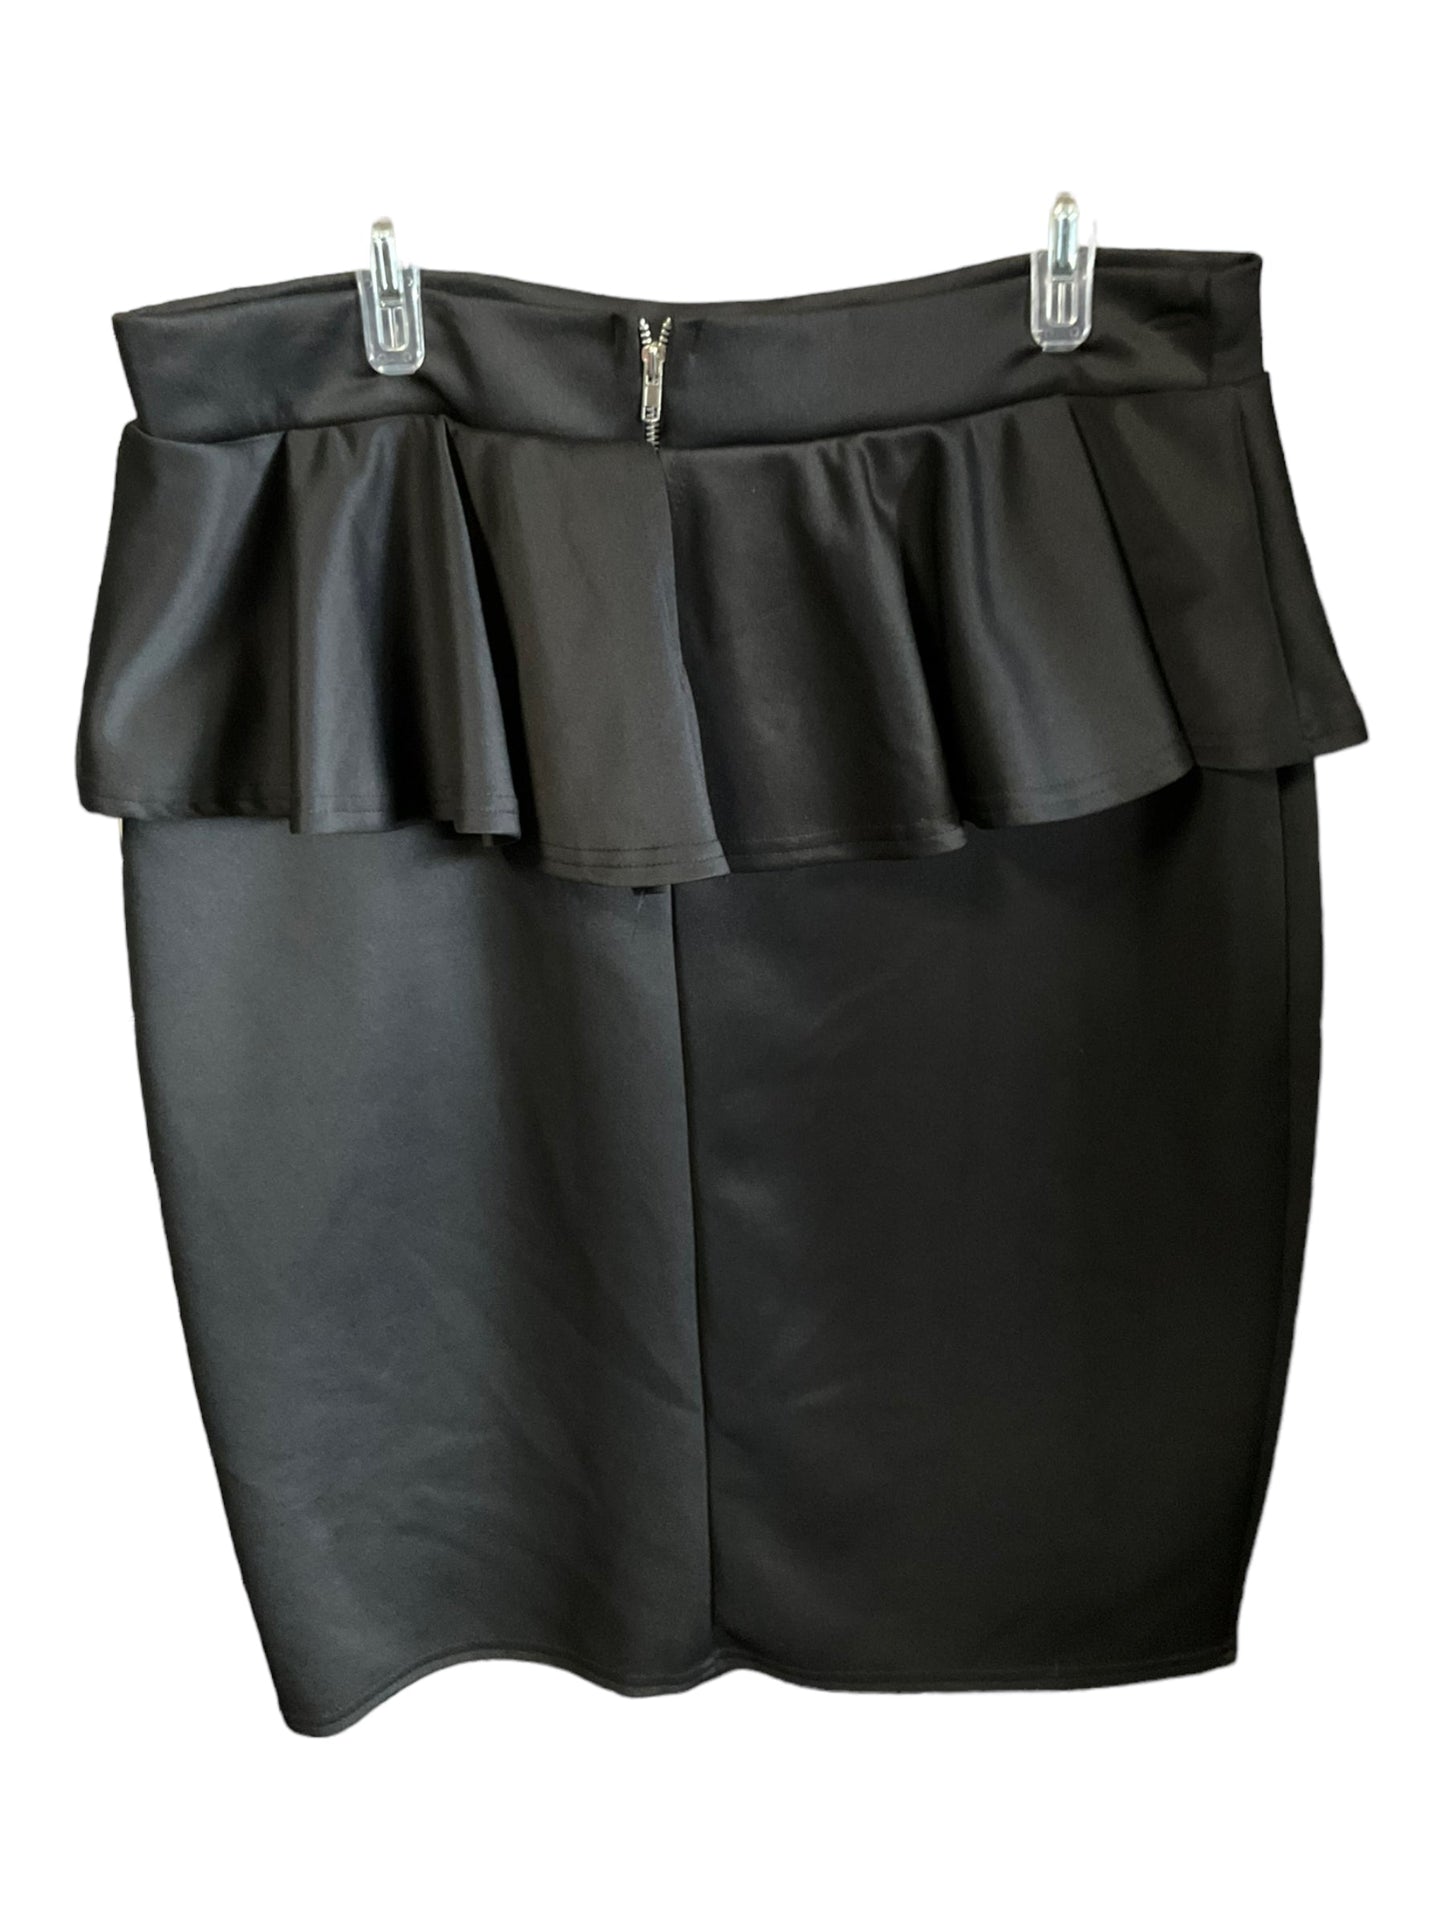 Skirt Mini & Short By Boohoo Boutique  Size: 1x